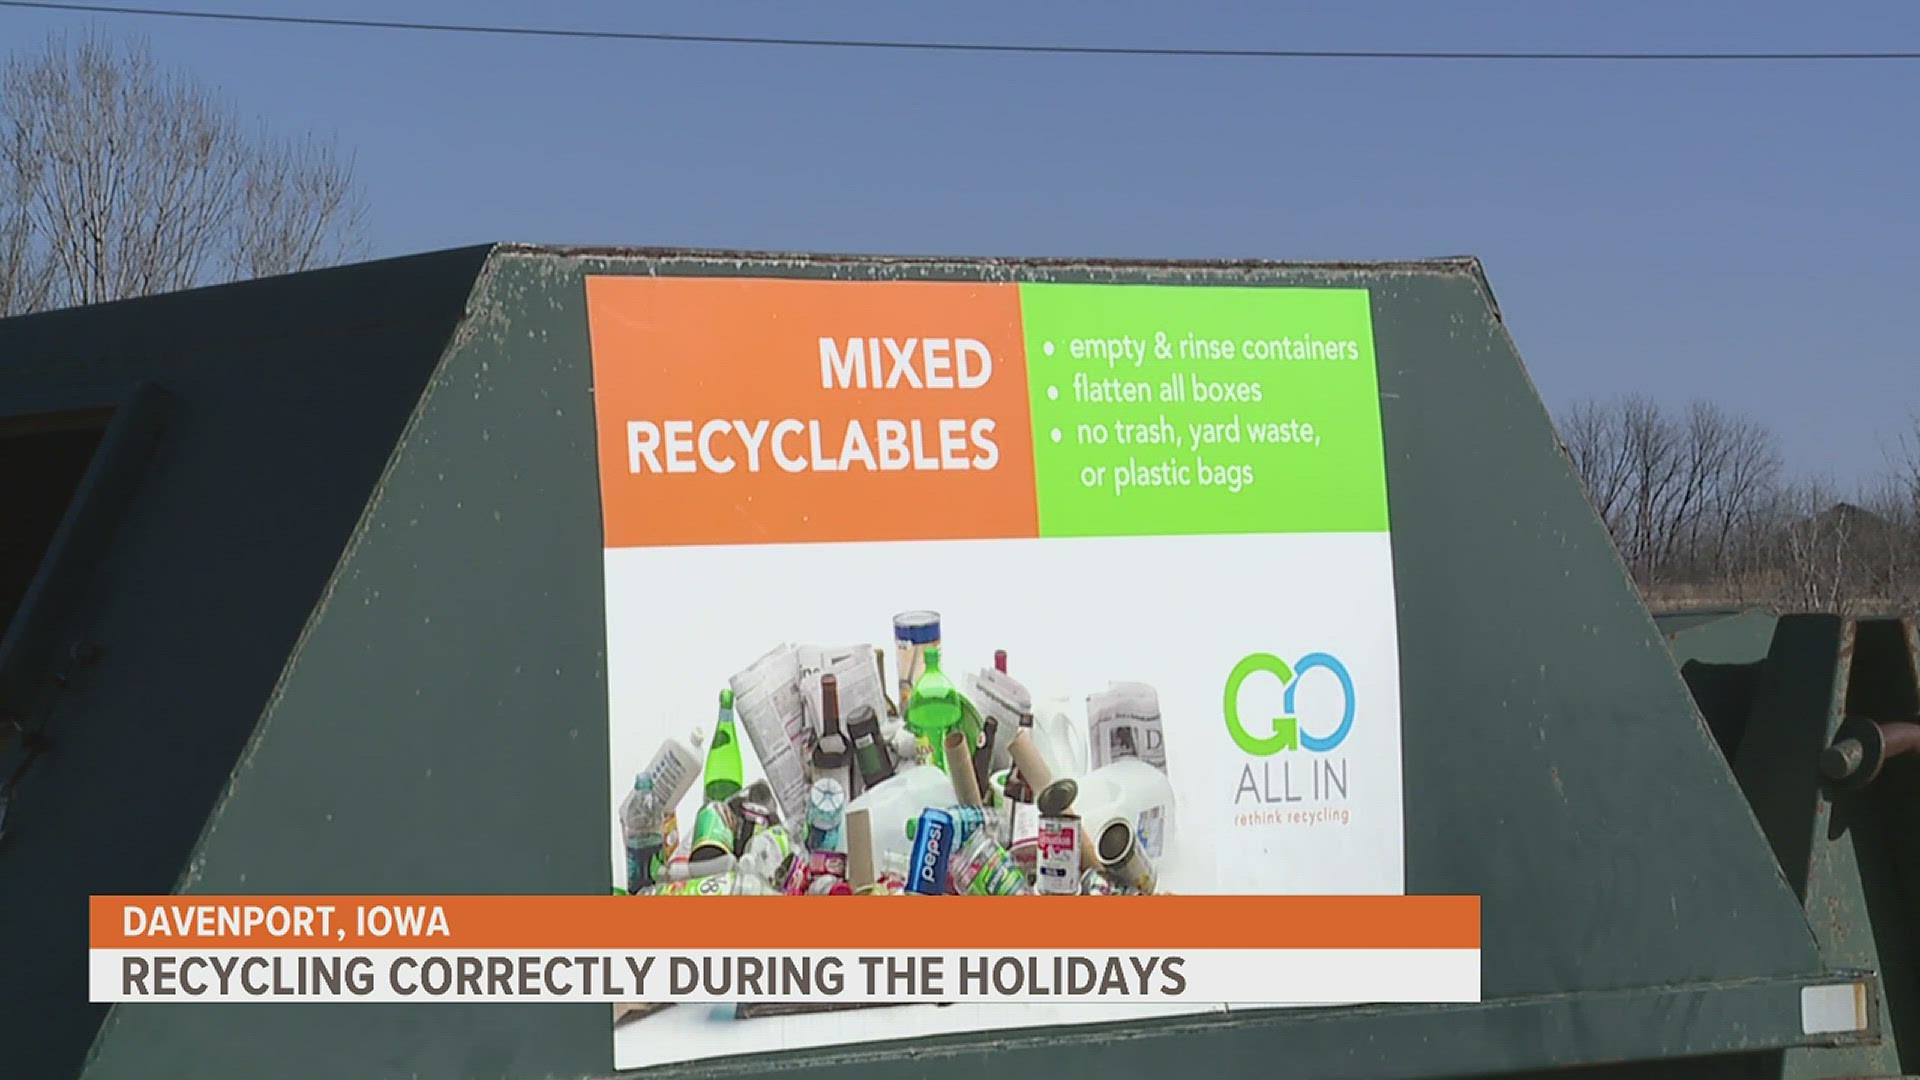 Tips: Holiday recycling